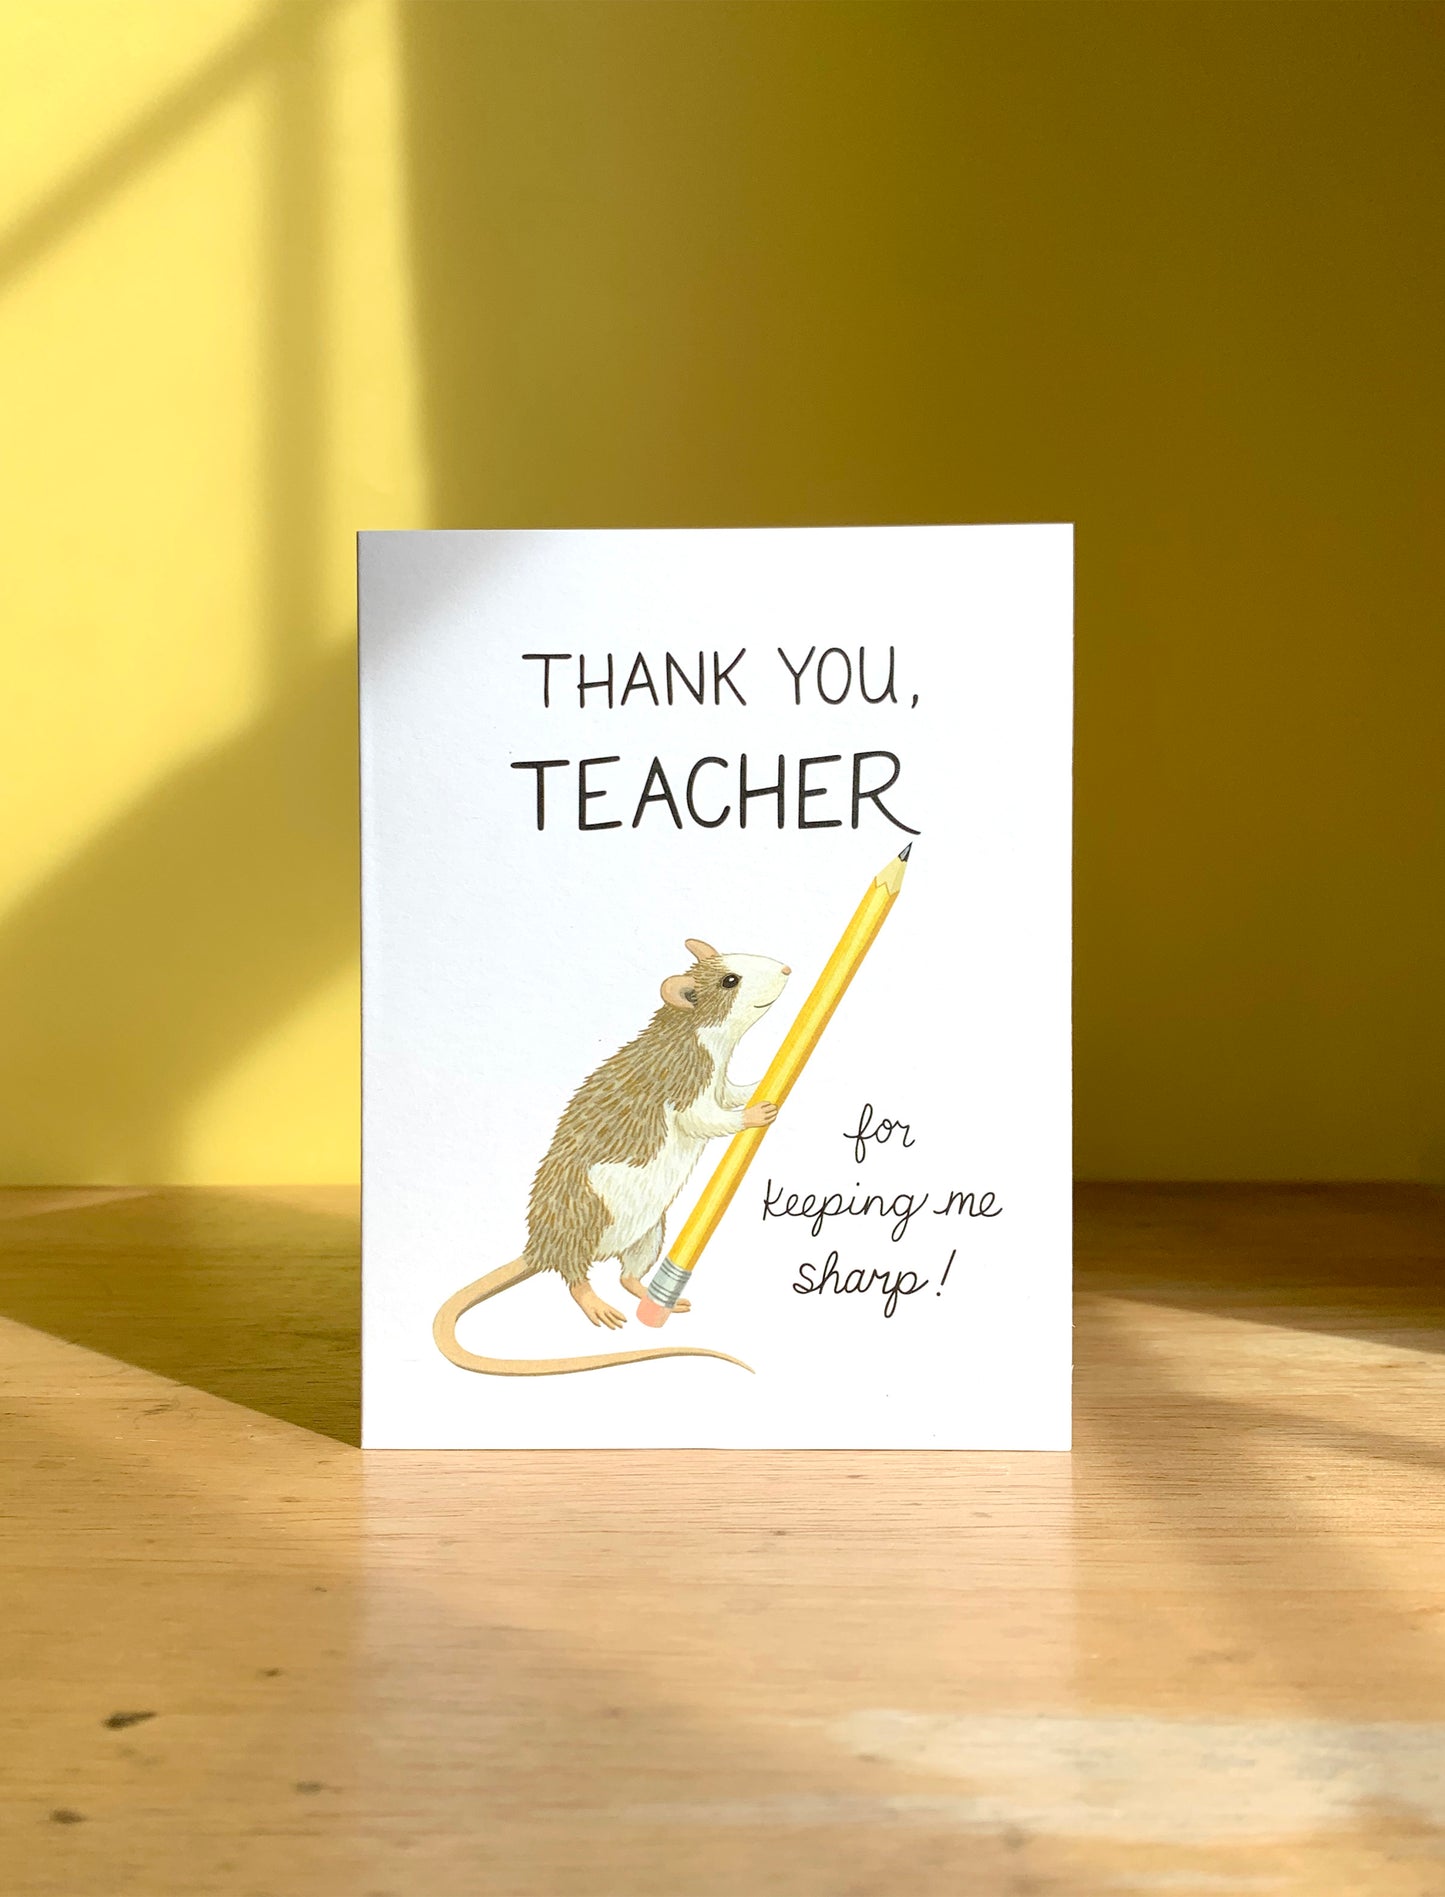 CUTE MOUSE WITH PENCIL - TEACHER APPRECIATION GREETING CARD